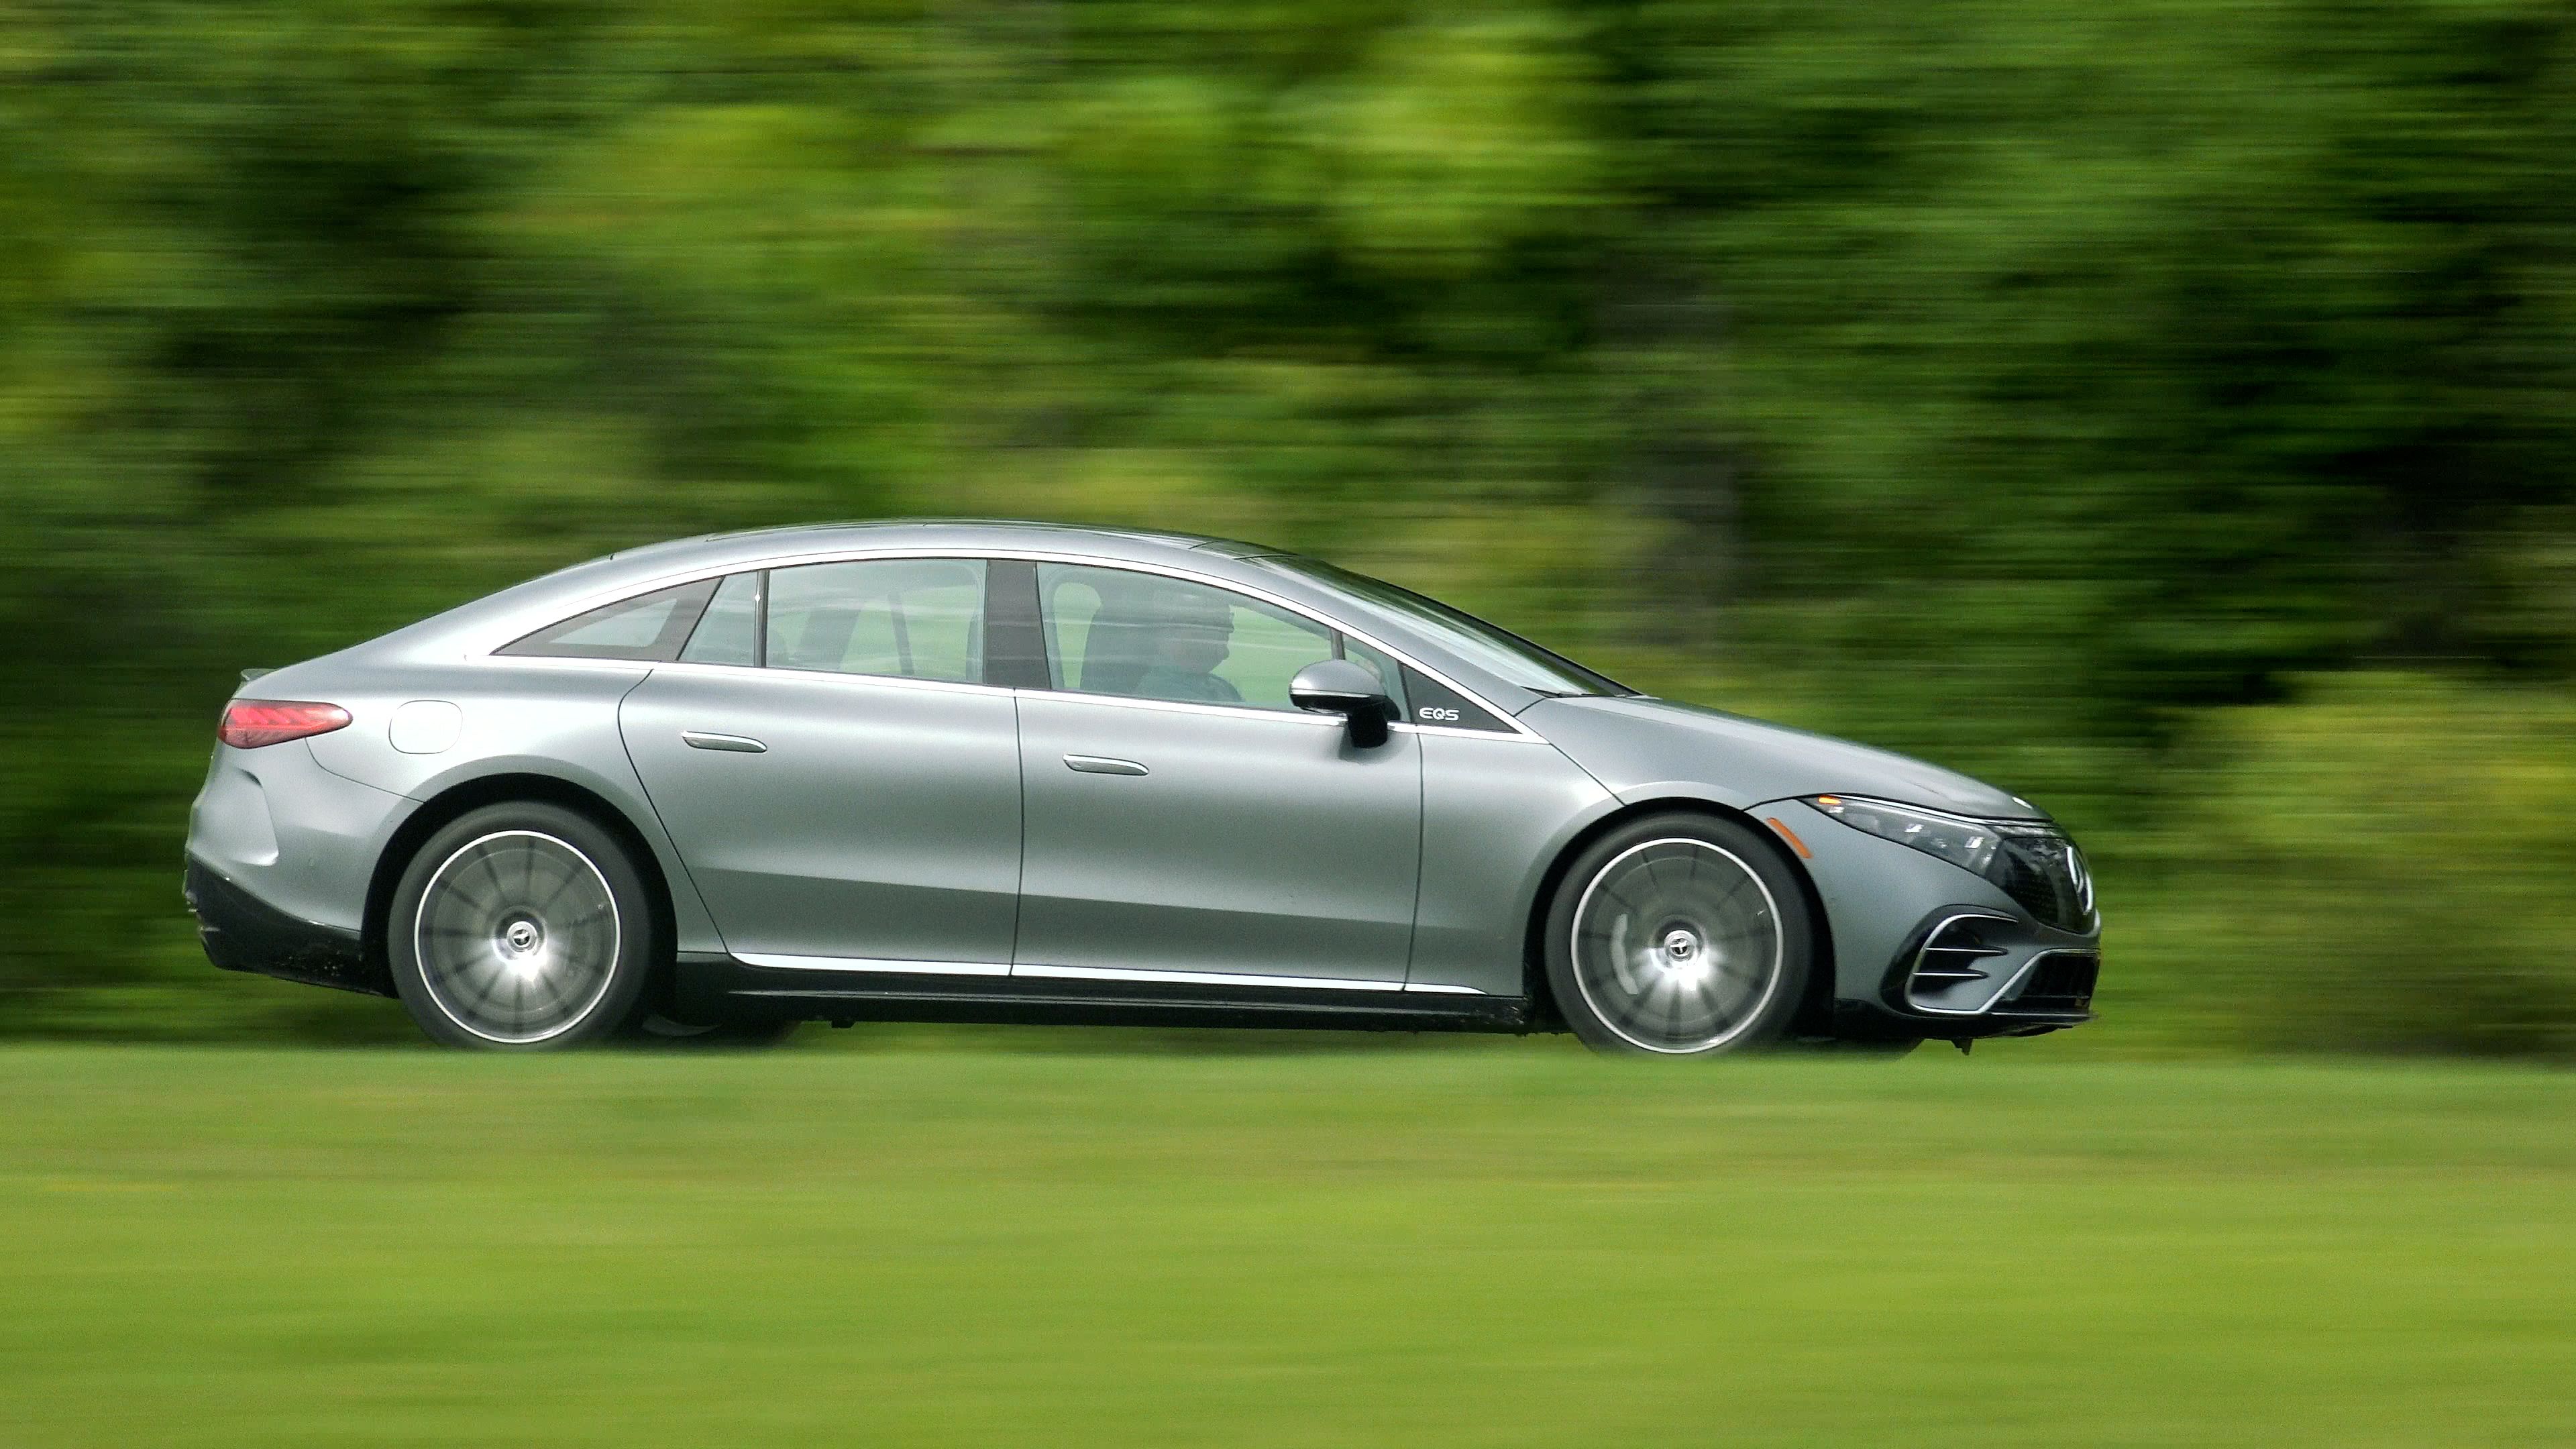 2022 Mercedes EQS 580 4MATIC Review: Tech Laden and Eager to Please